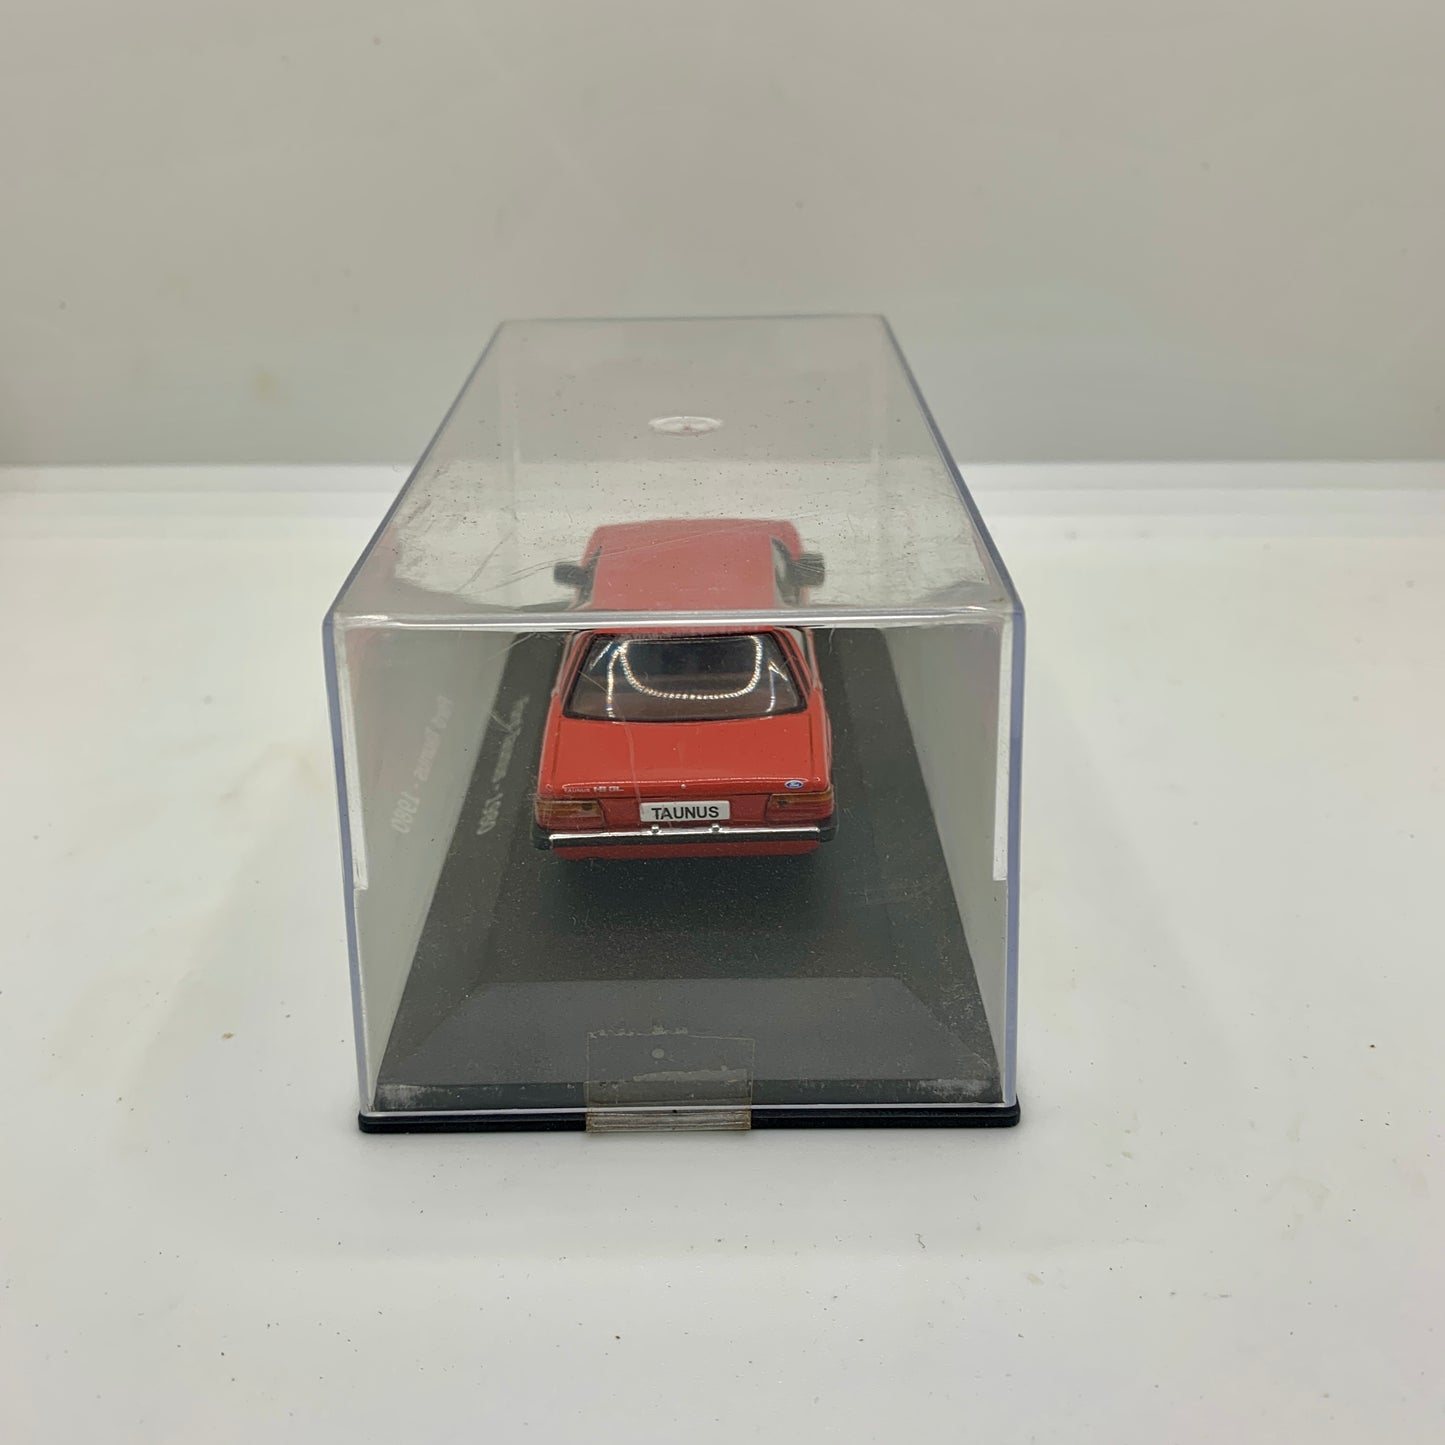 Iconic Ford Taunus Collectable Classic Cars 1/43 Scale